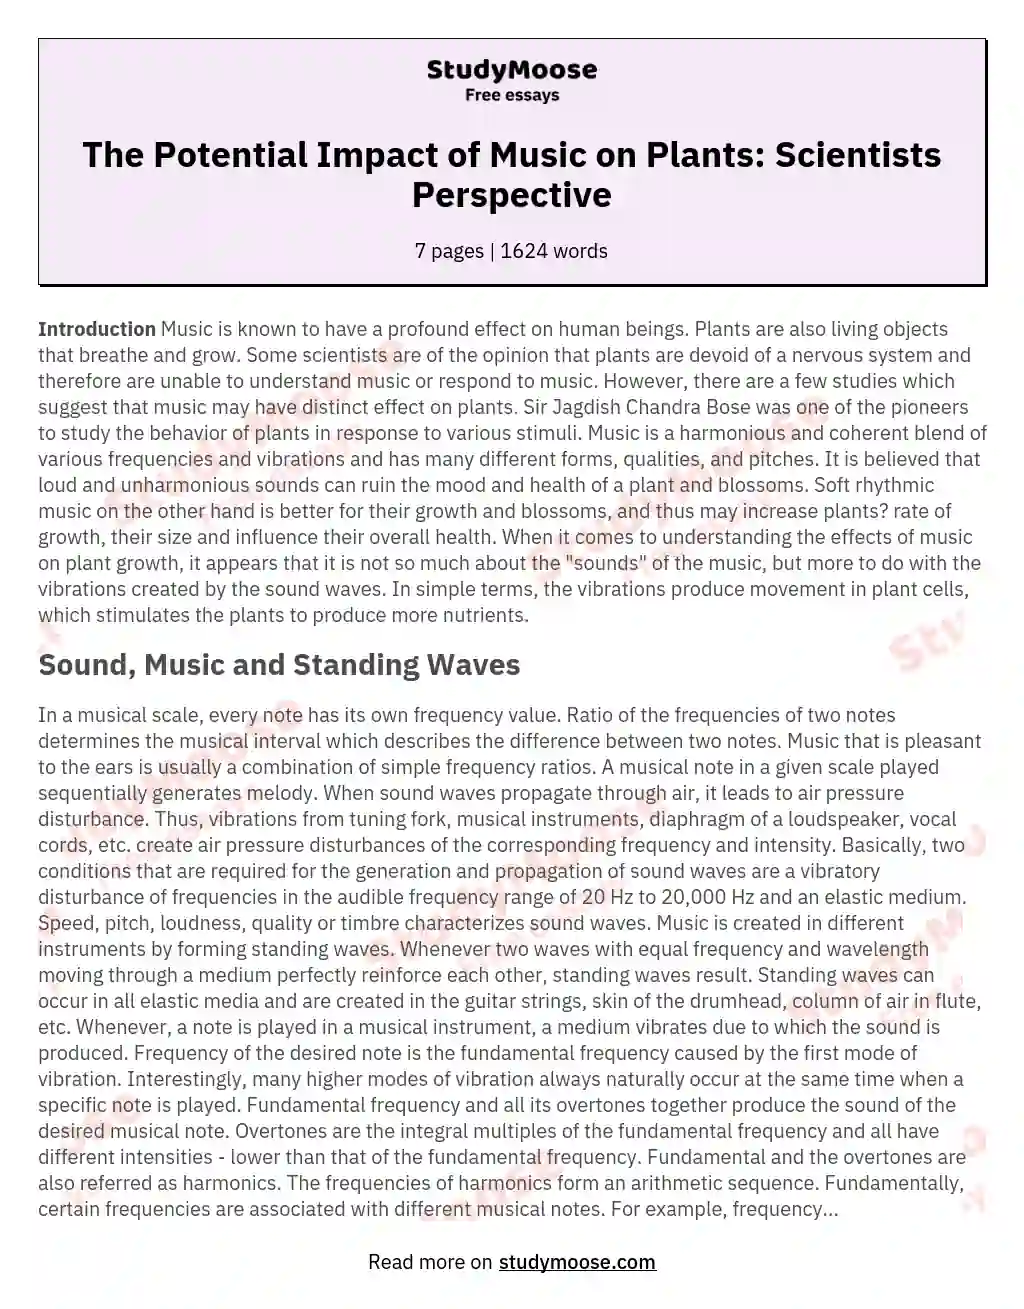 The Potential Impact of Music on Plants: Scientists Perspective essay